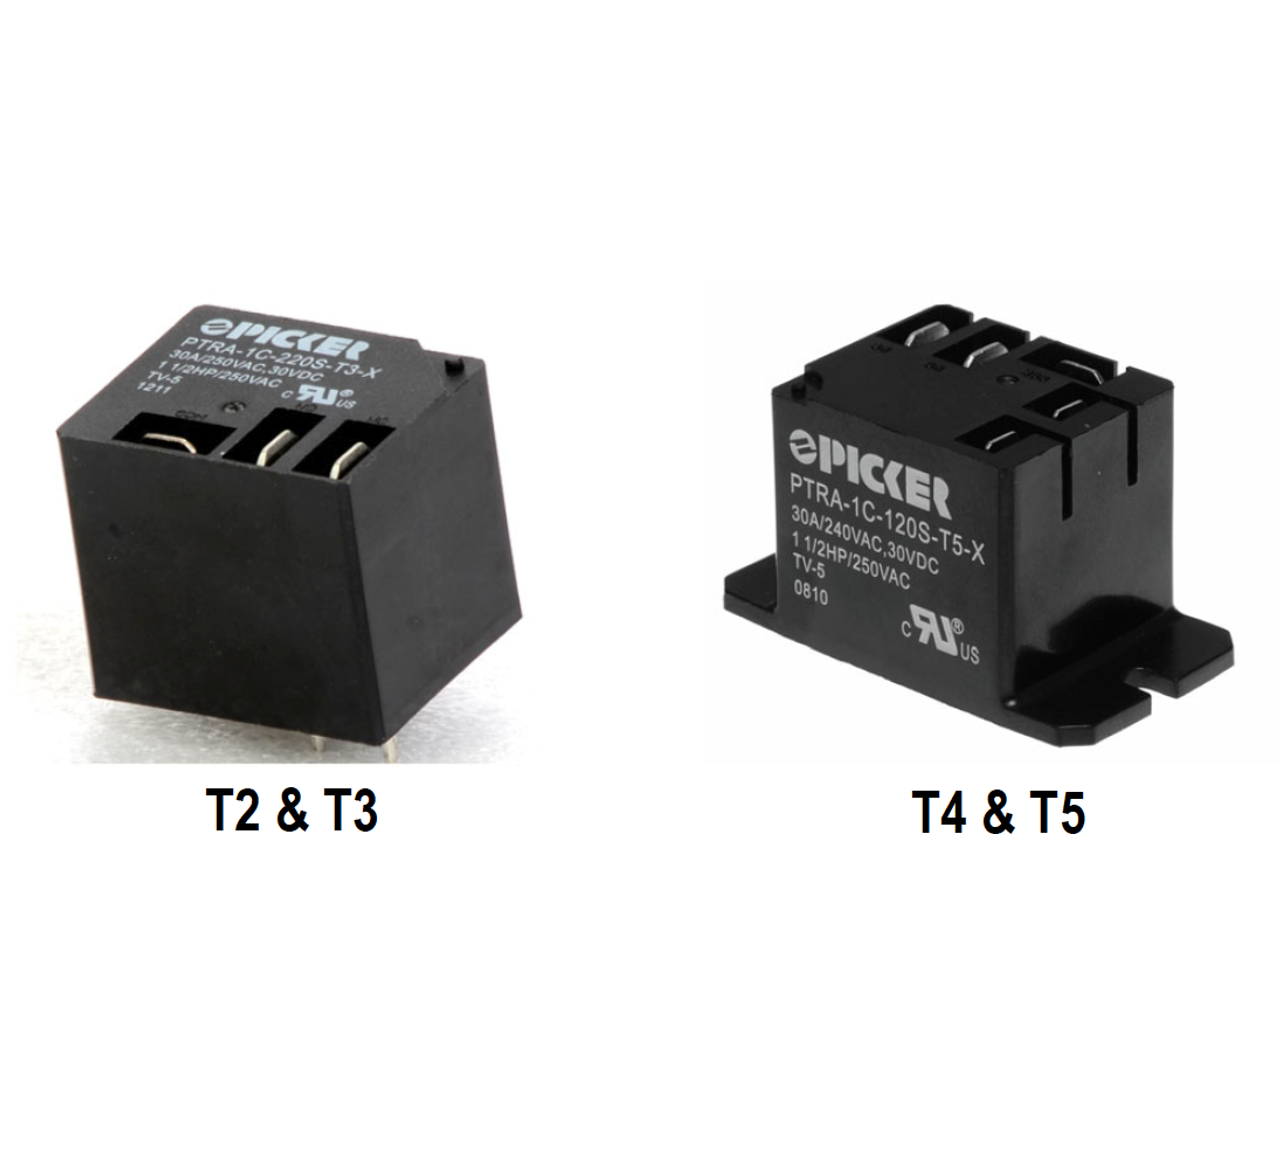 Picker PTRA-1A-12CT-T3-X Power Relays